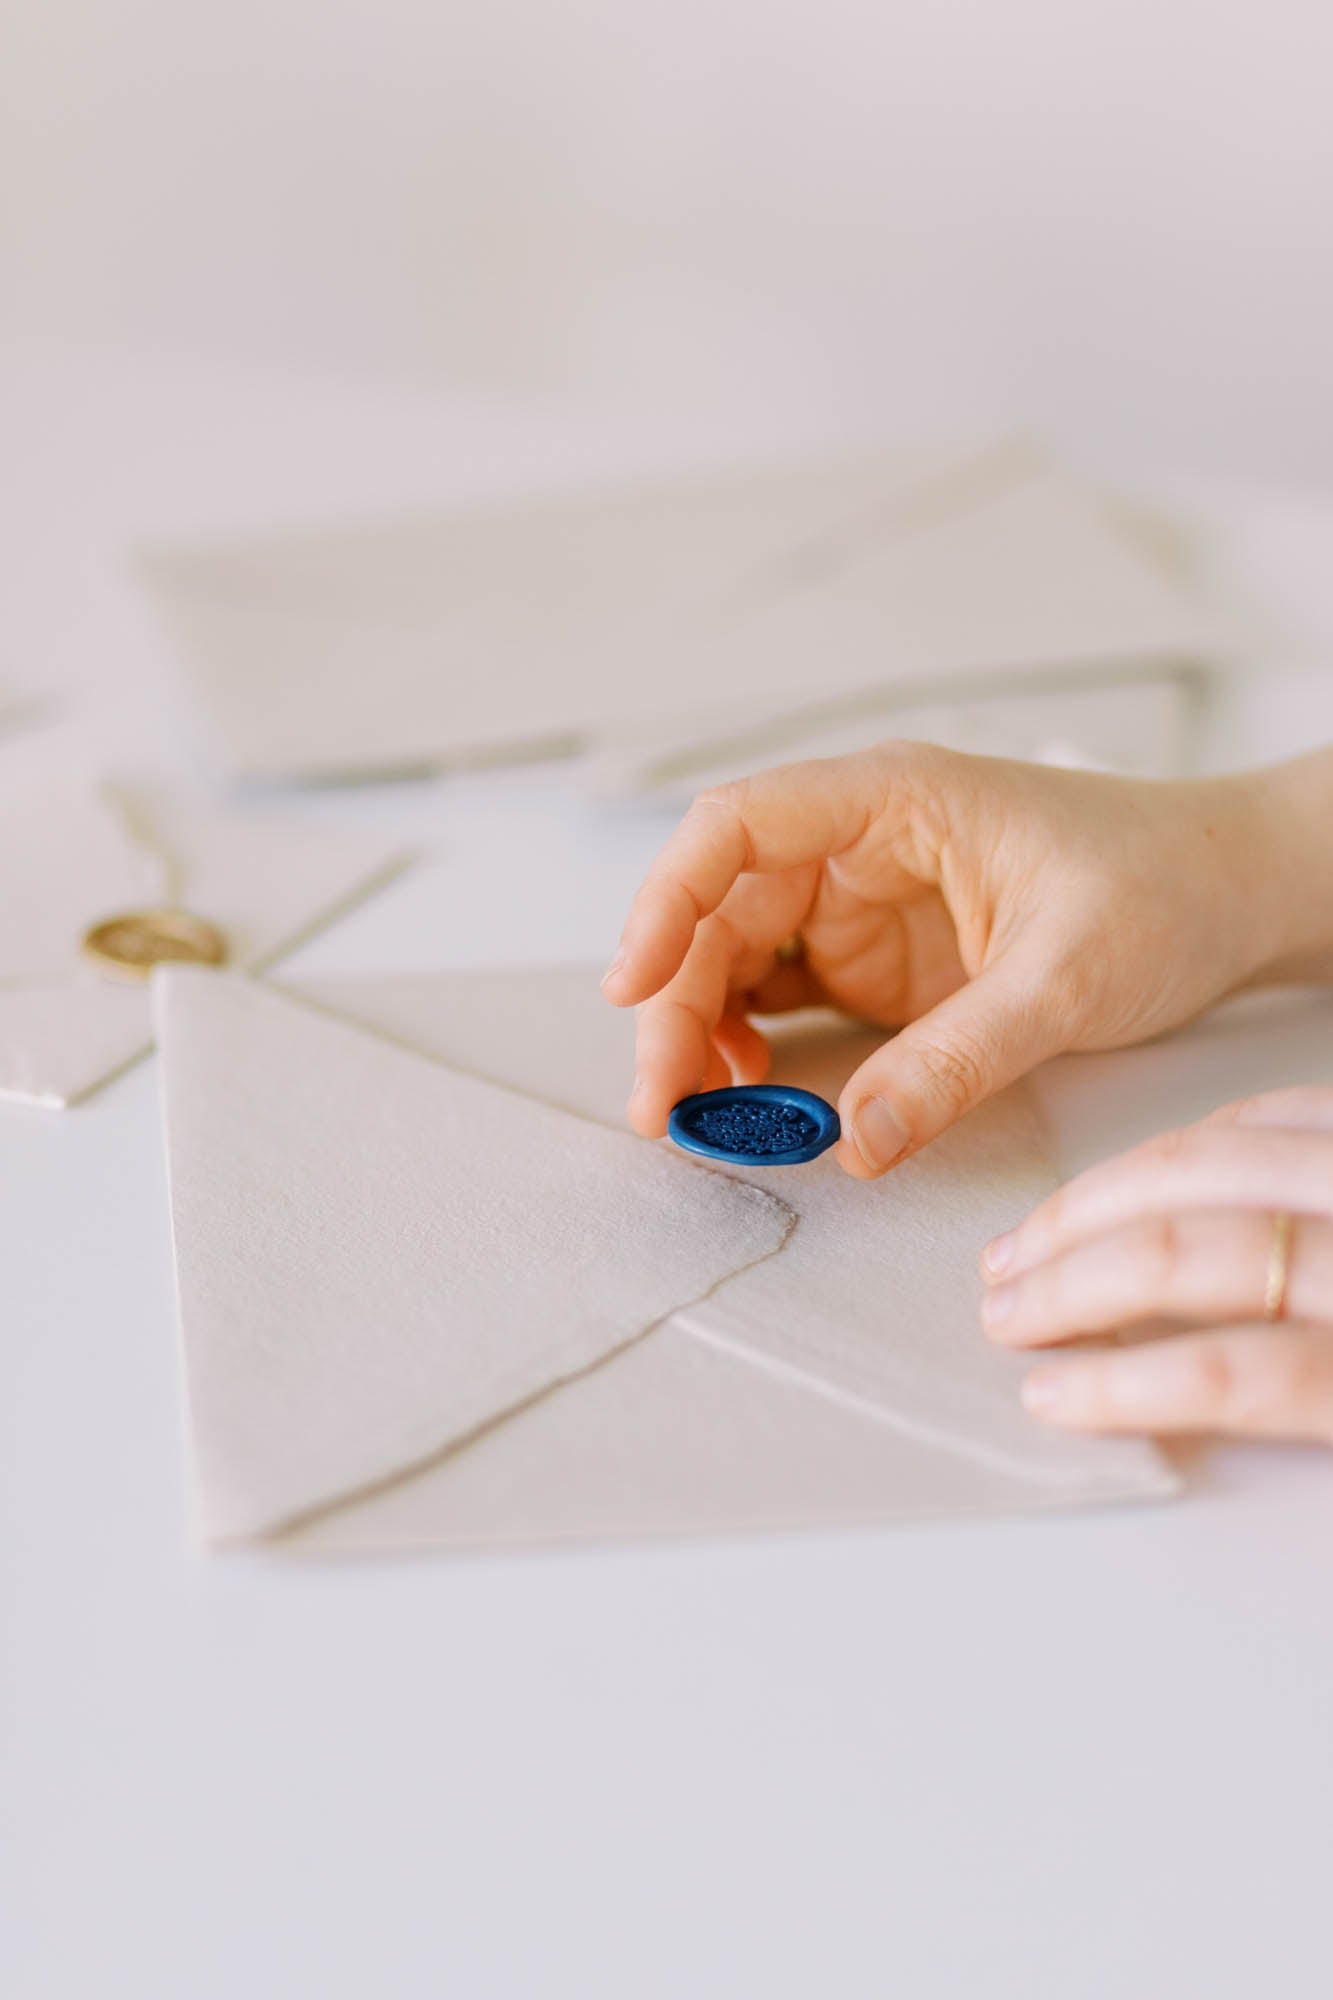 Seal your handmade paper envelopes with style! Our latest blog post shows you how.